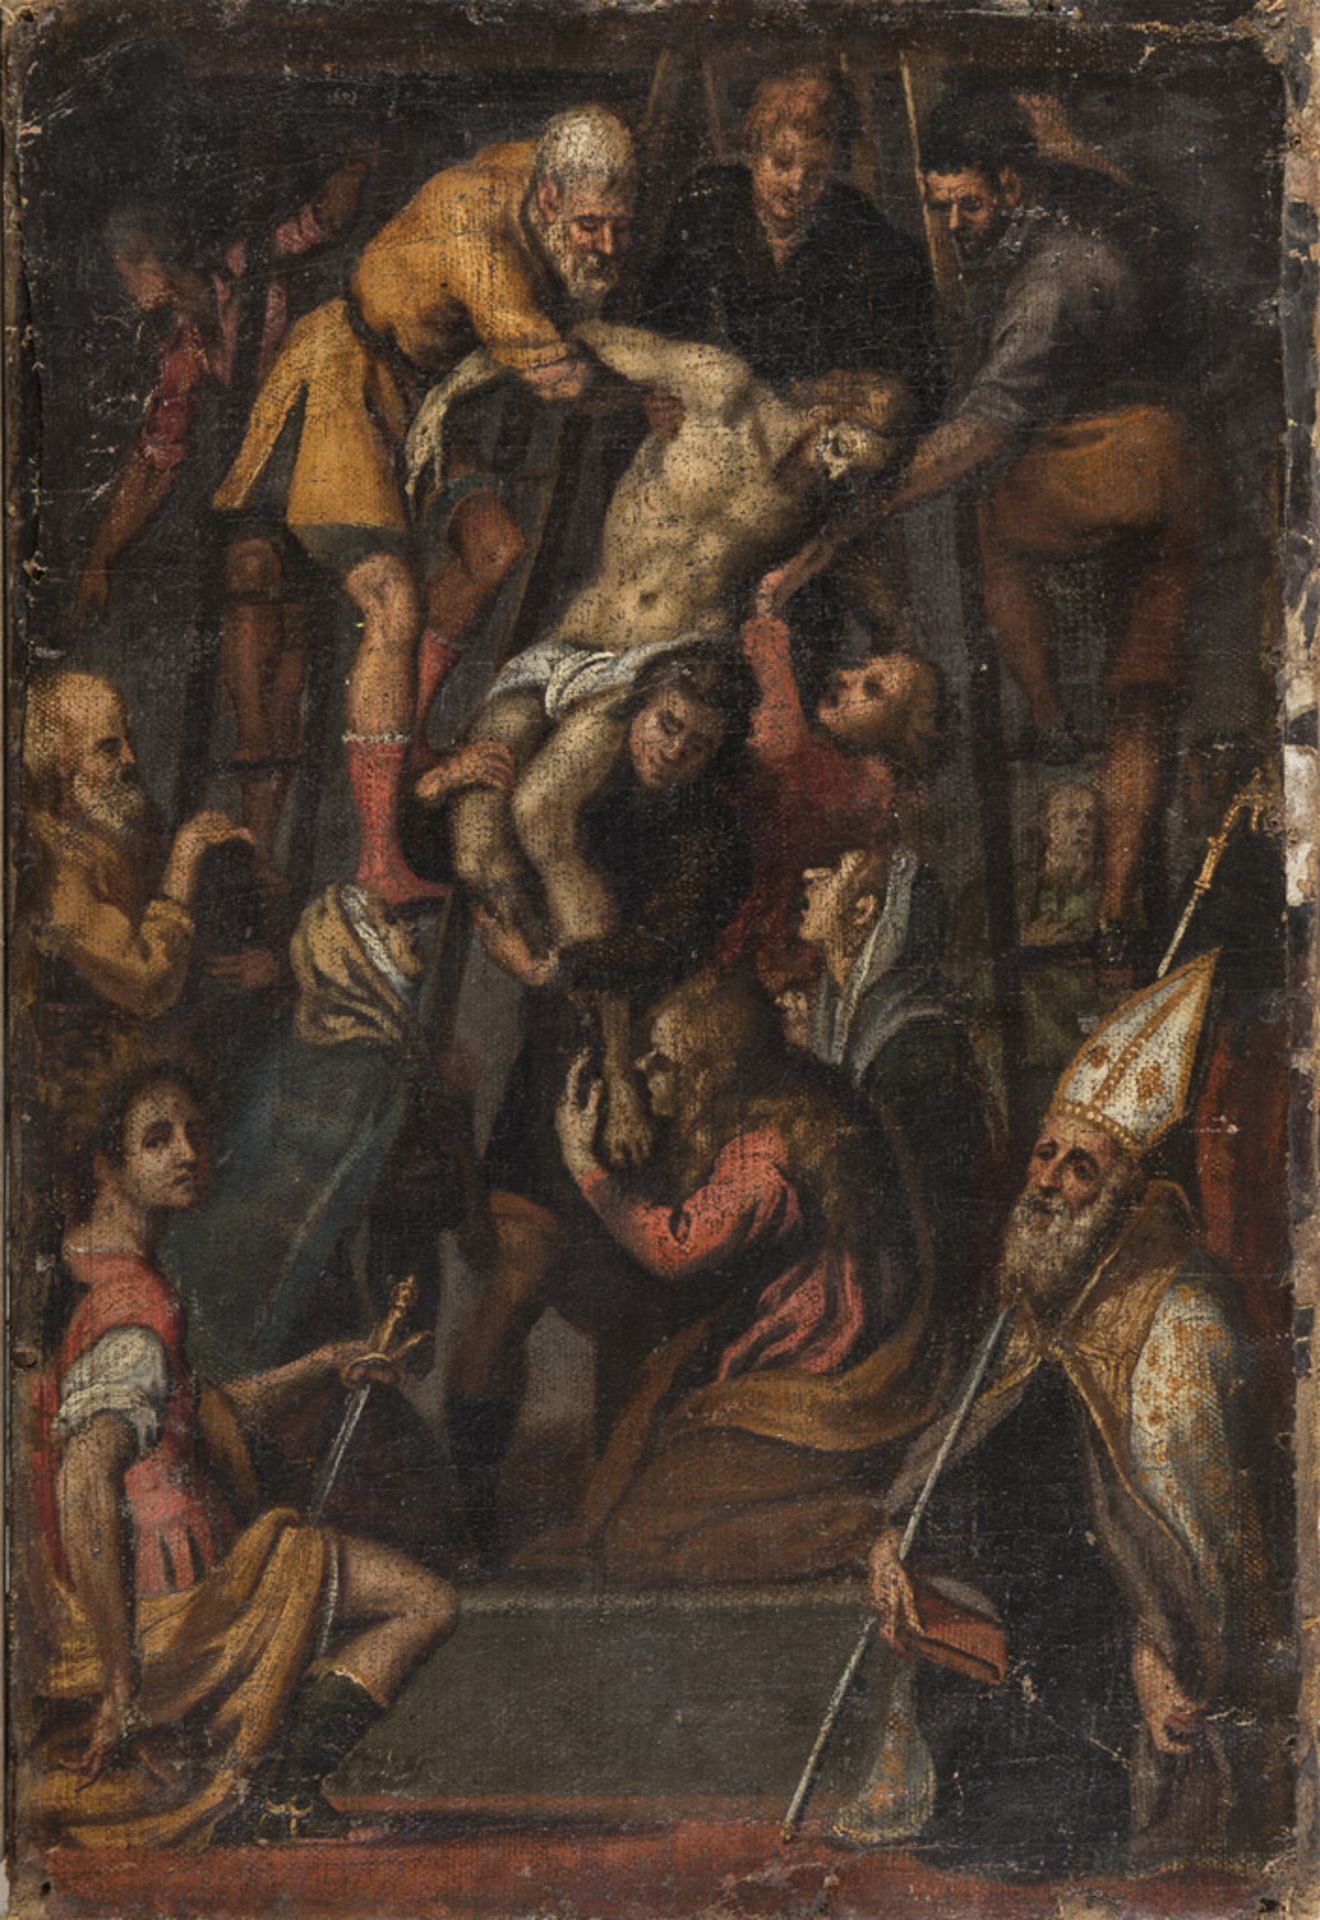 FLORENTINE PAINTER, 17TH CENTURY CHRIST TAKEN DOWN FROM THE CROSS Oil on canvas, cm. 52,5 x 35,5